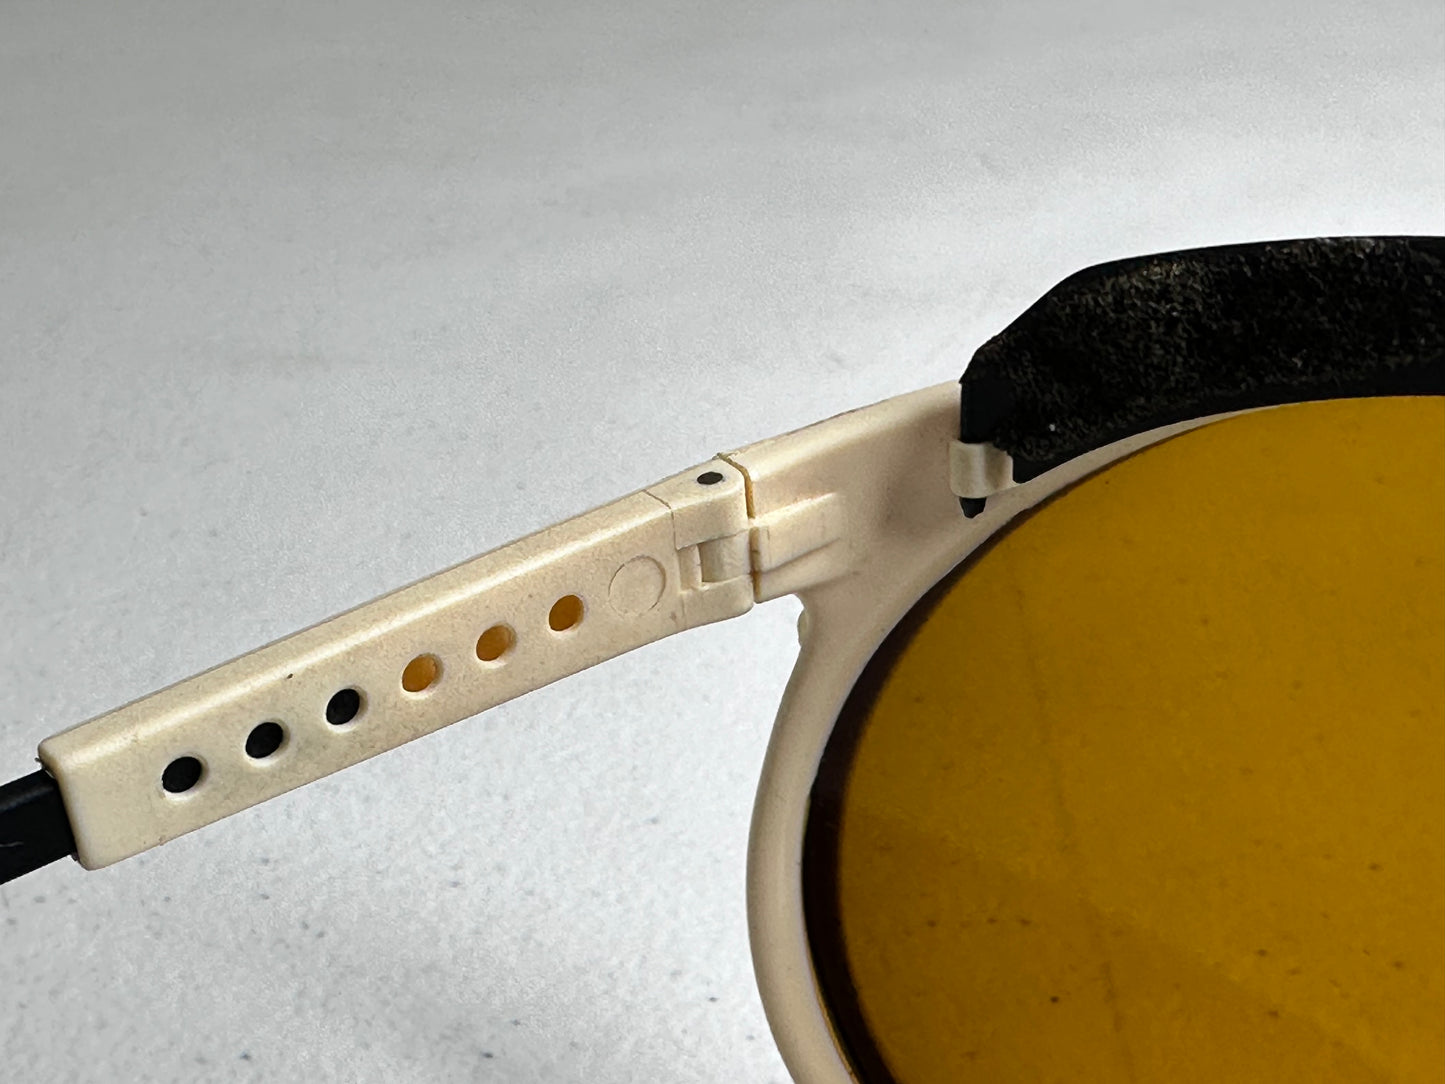 Vintage Bolle Chronoshield Sunglasses - Classic French Ski Goggles with Yellow Lenses